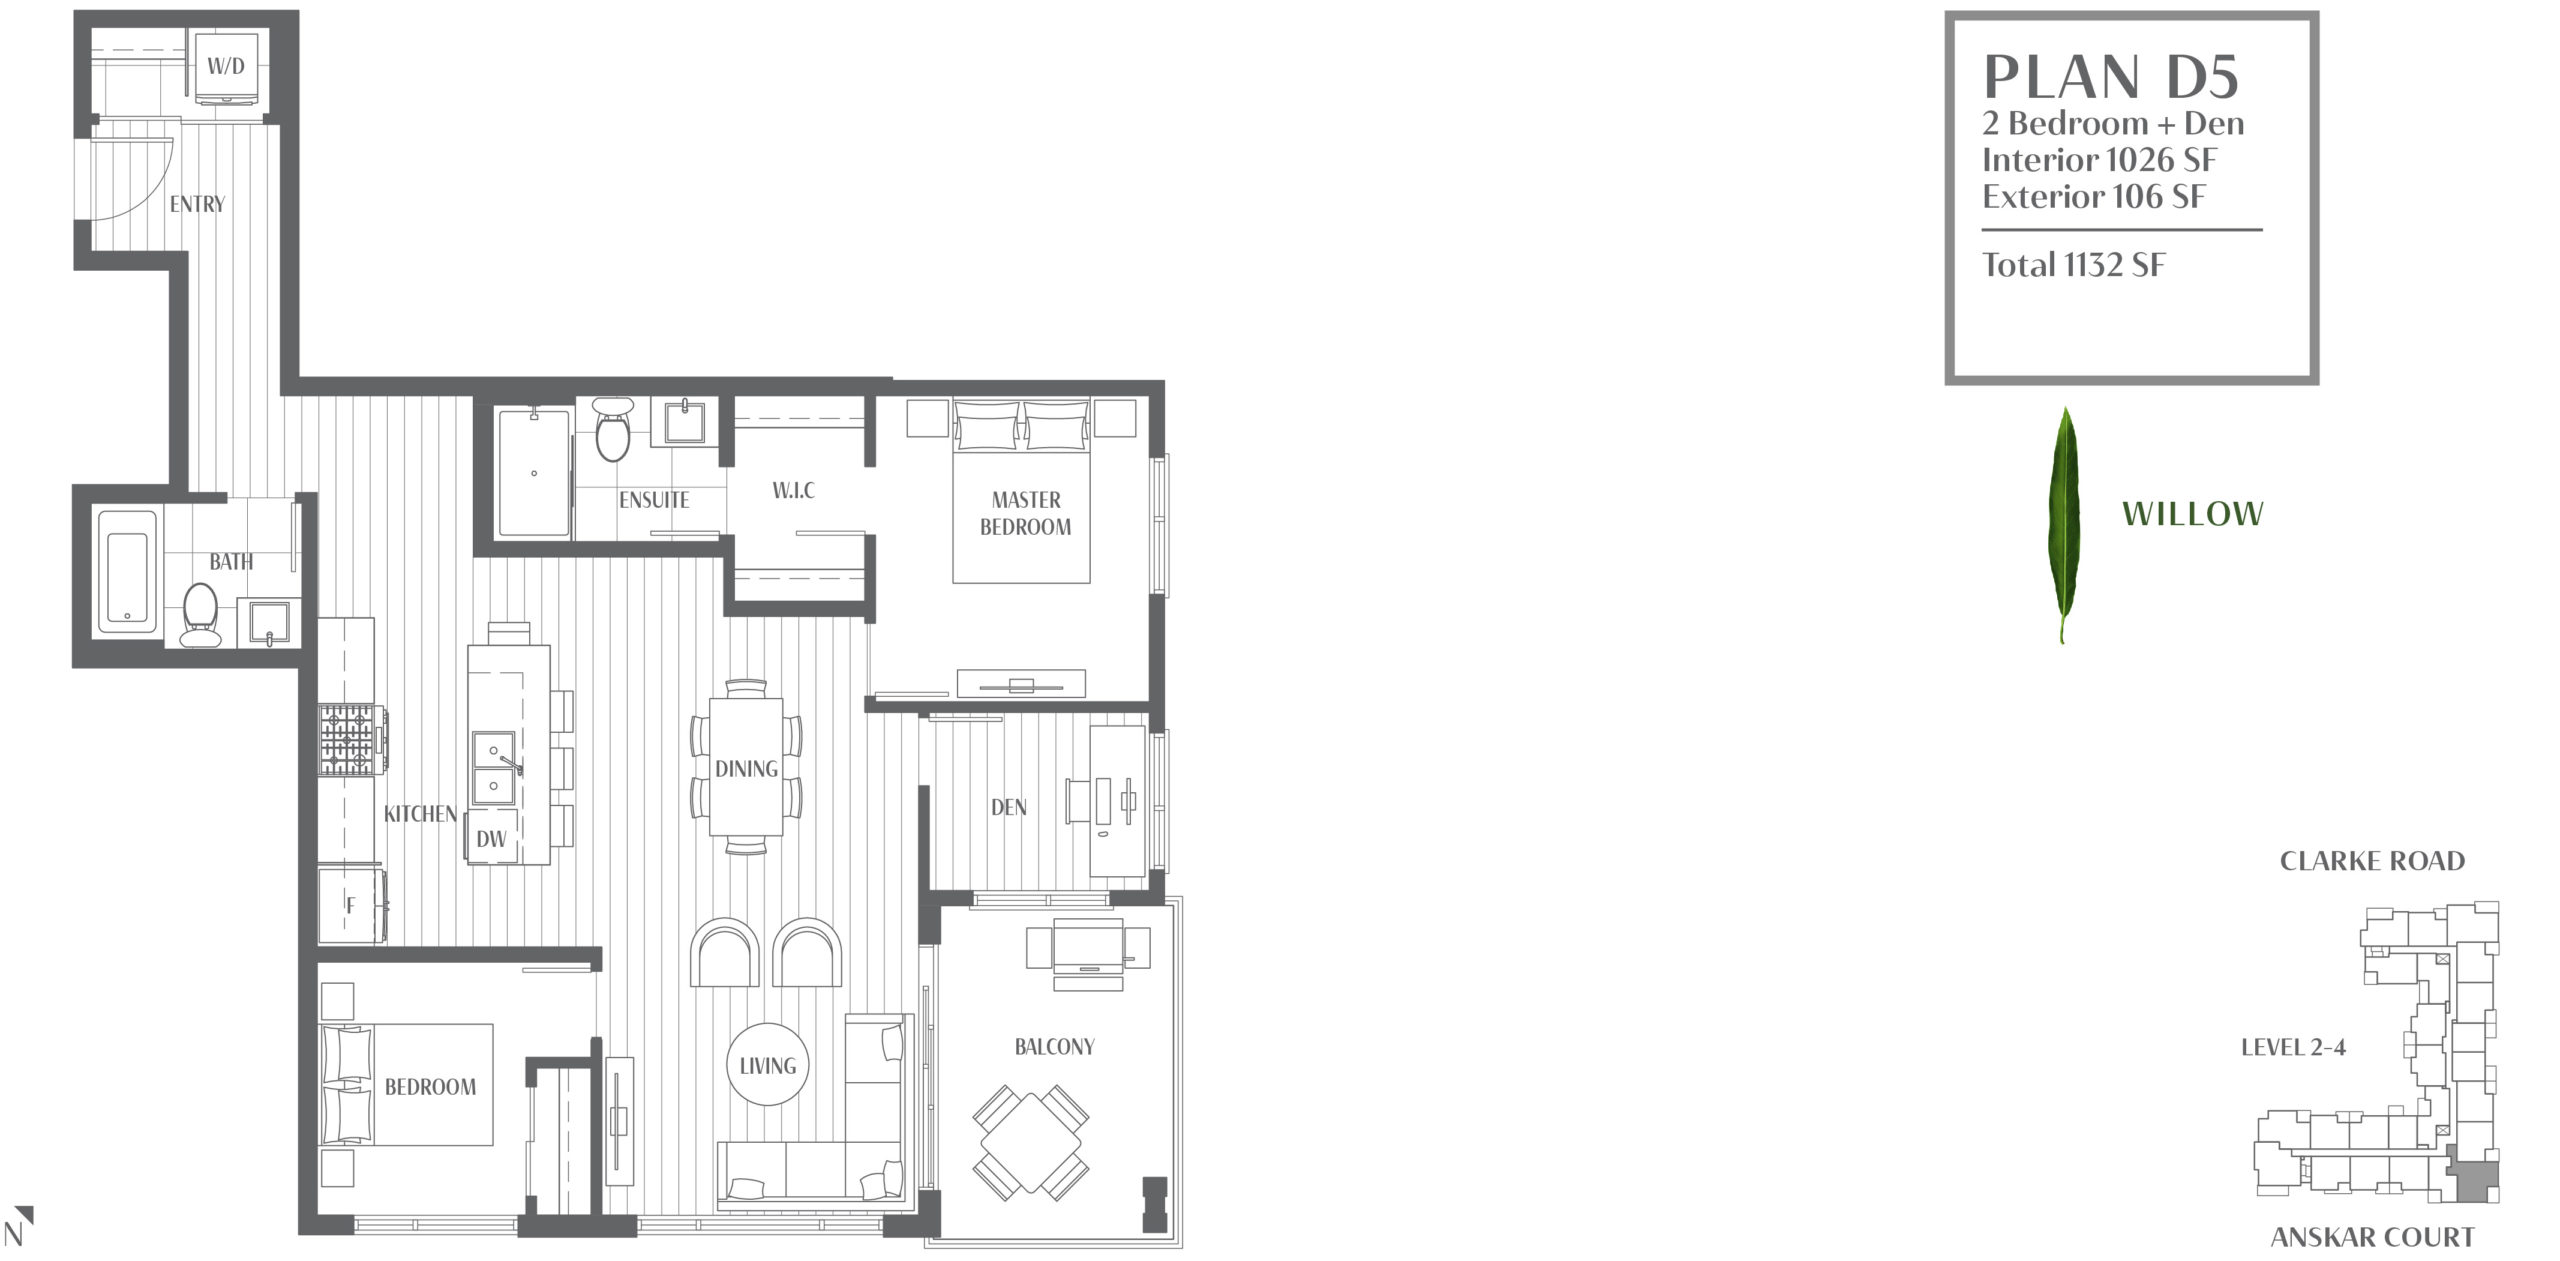  Floor Plan of The Oaks Phase 3 (Willow) Condos with undefined beds